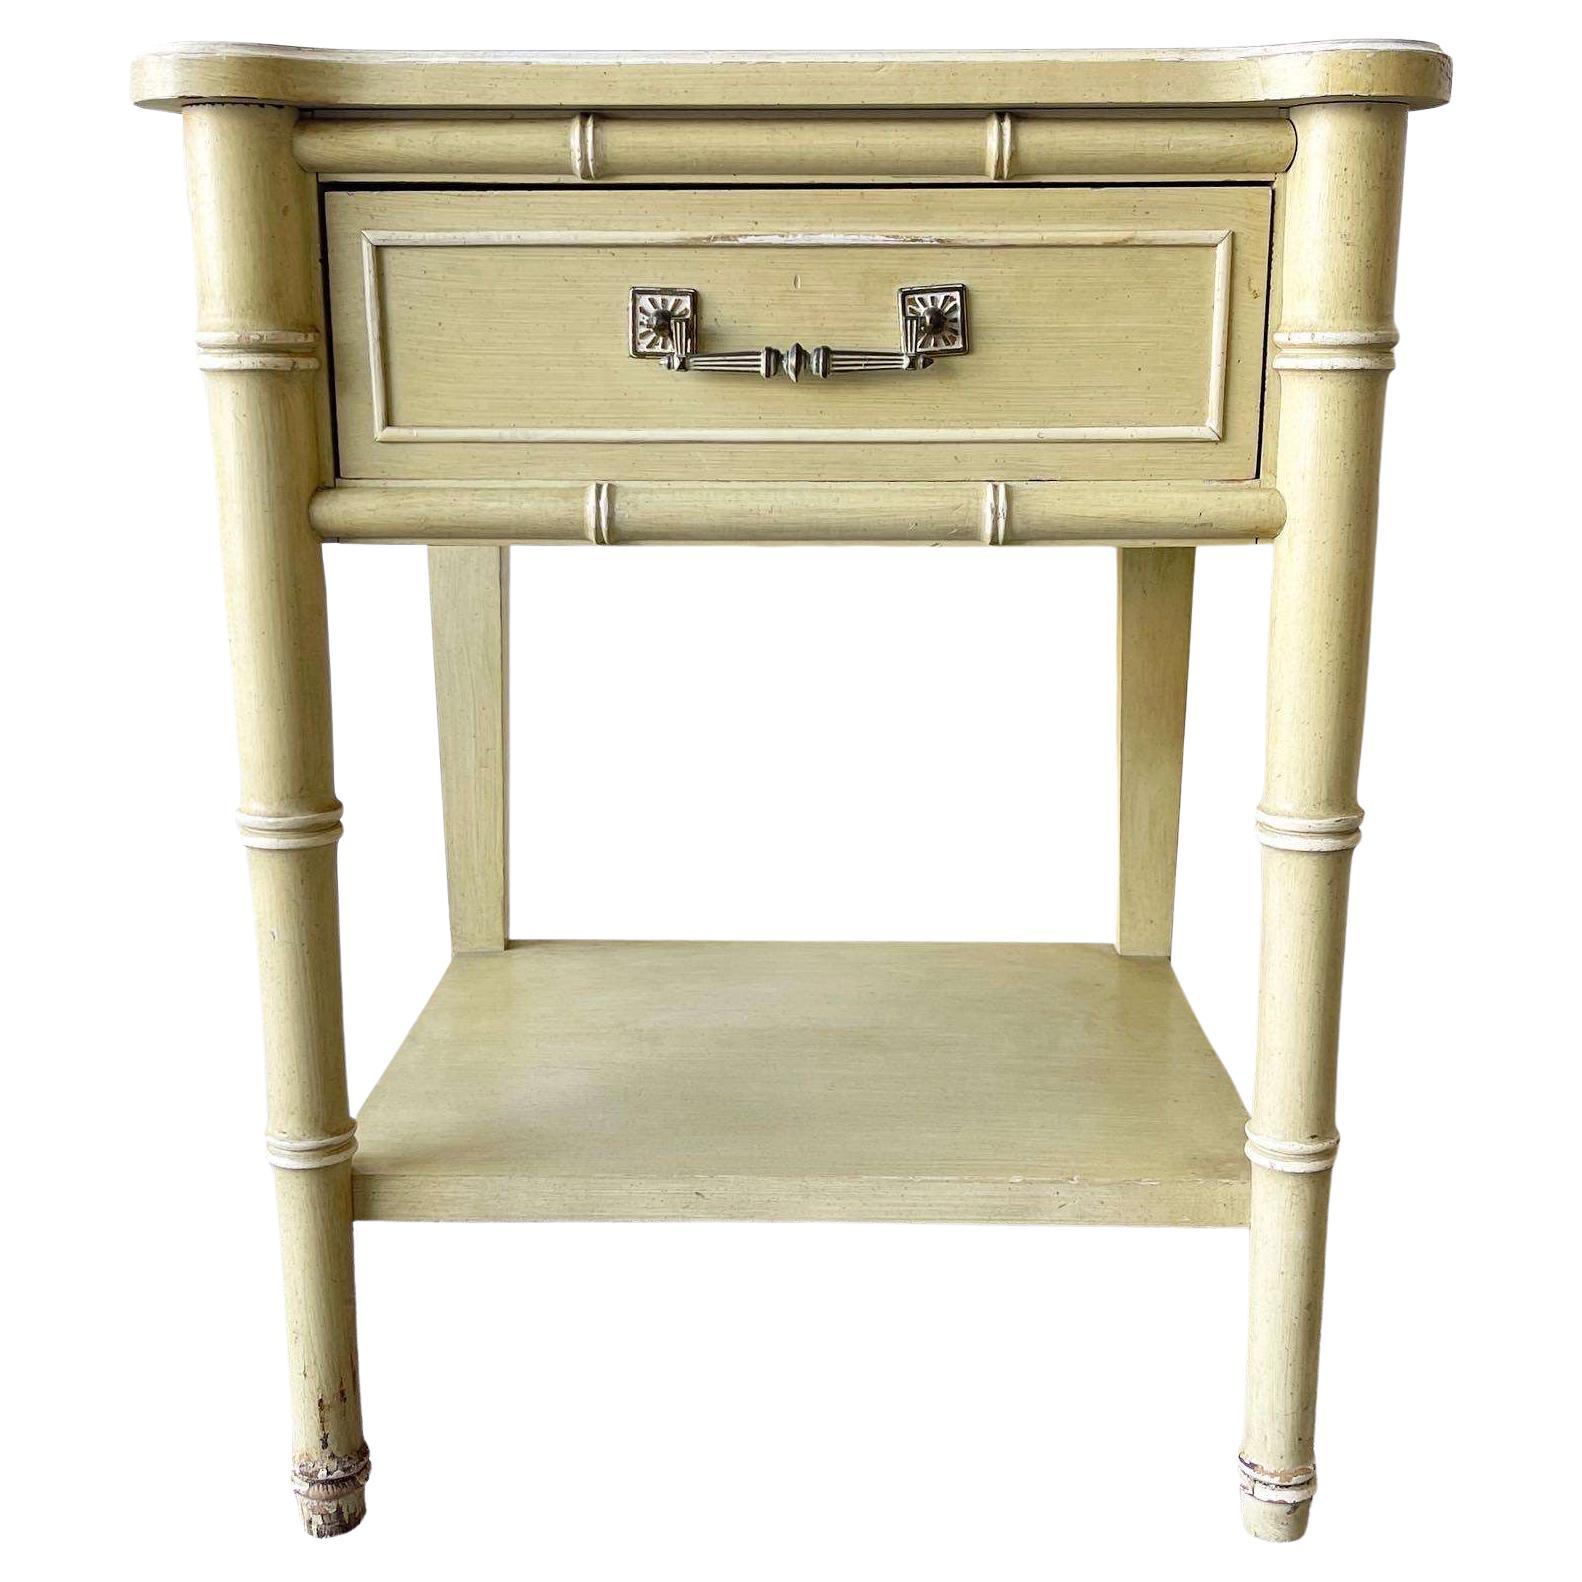 Vintage Coastal Green and White Faux Bamboo End Table